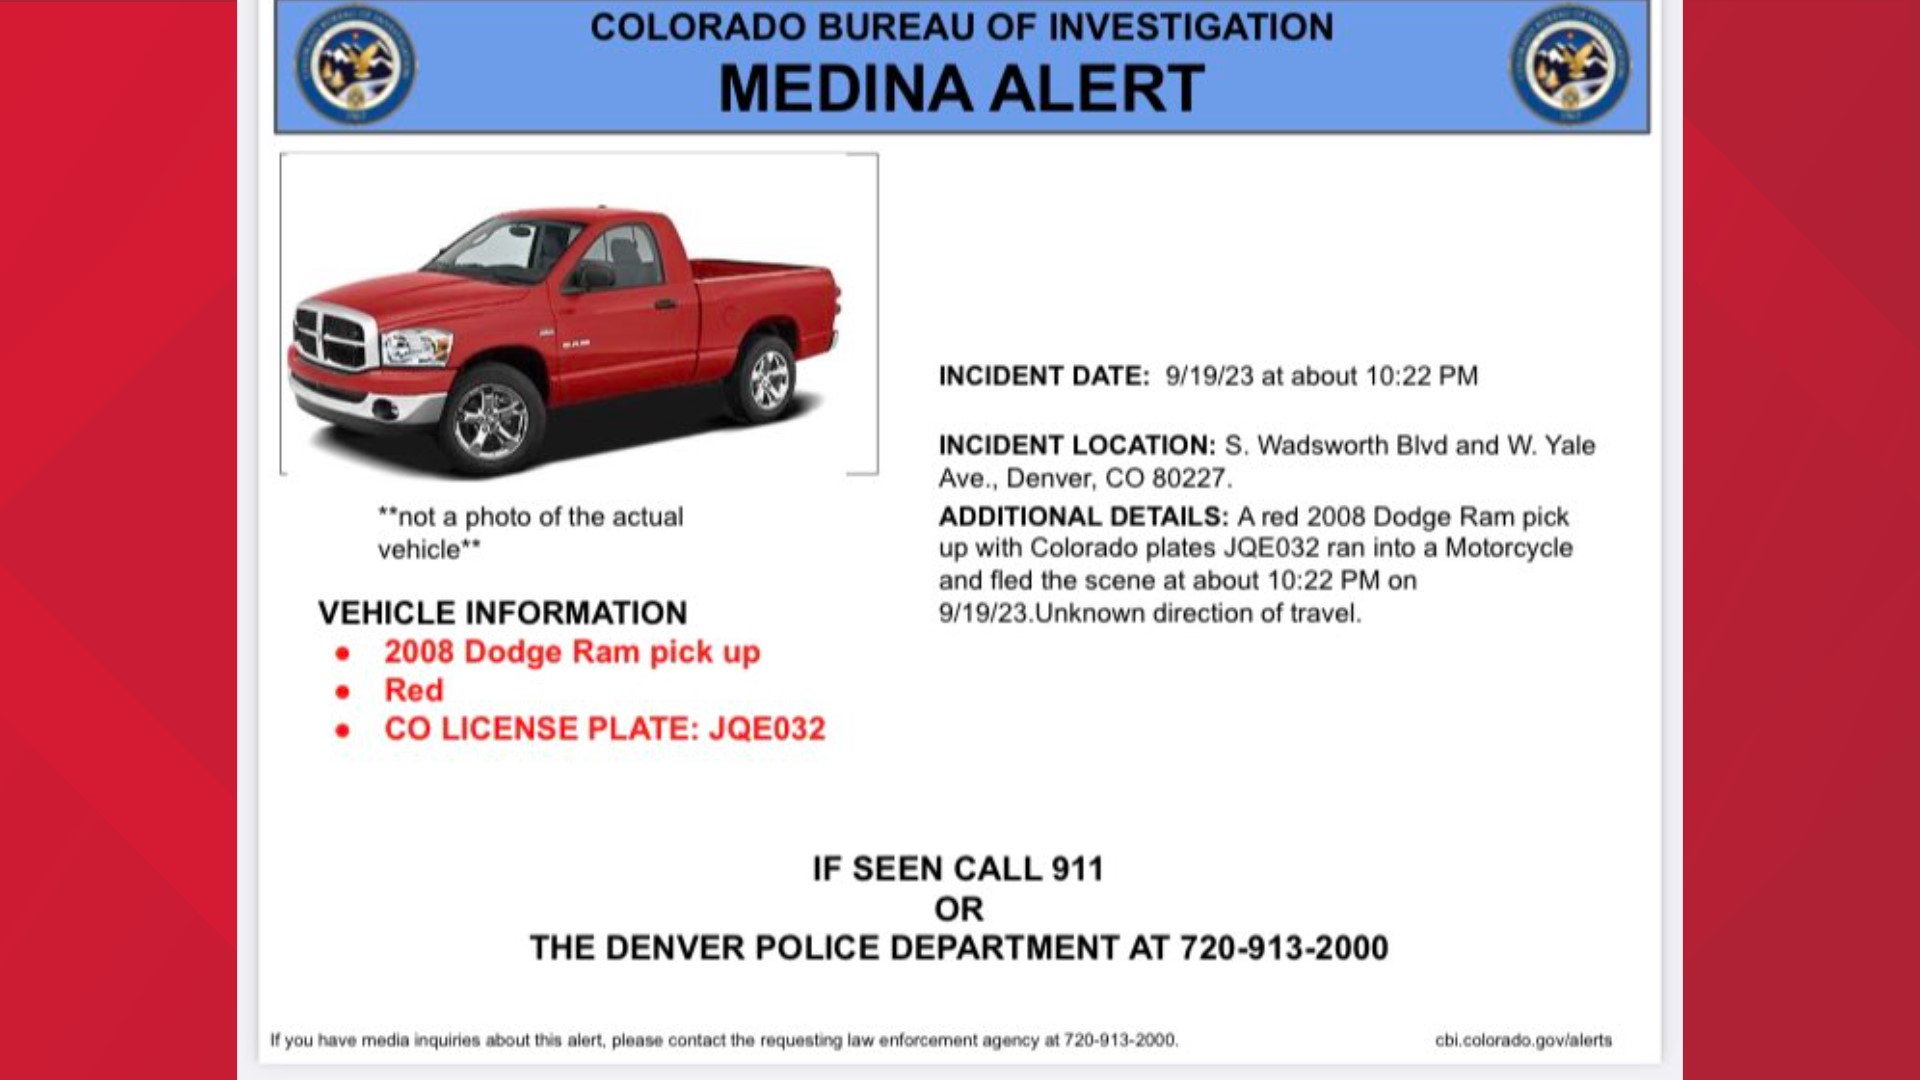 Police issued a Medina Alert for a red 2008 Dodge Ram with Colorado license plate JQE-032.